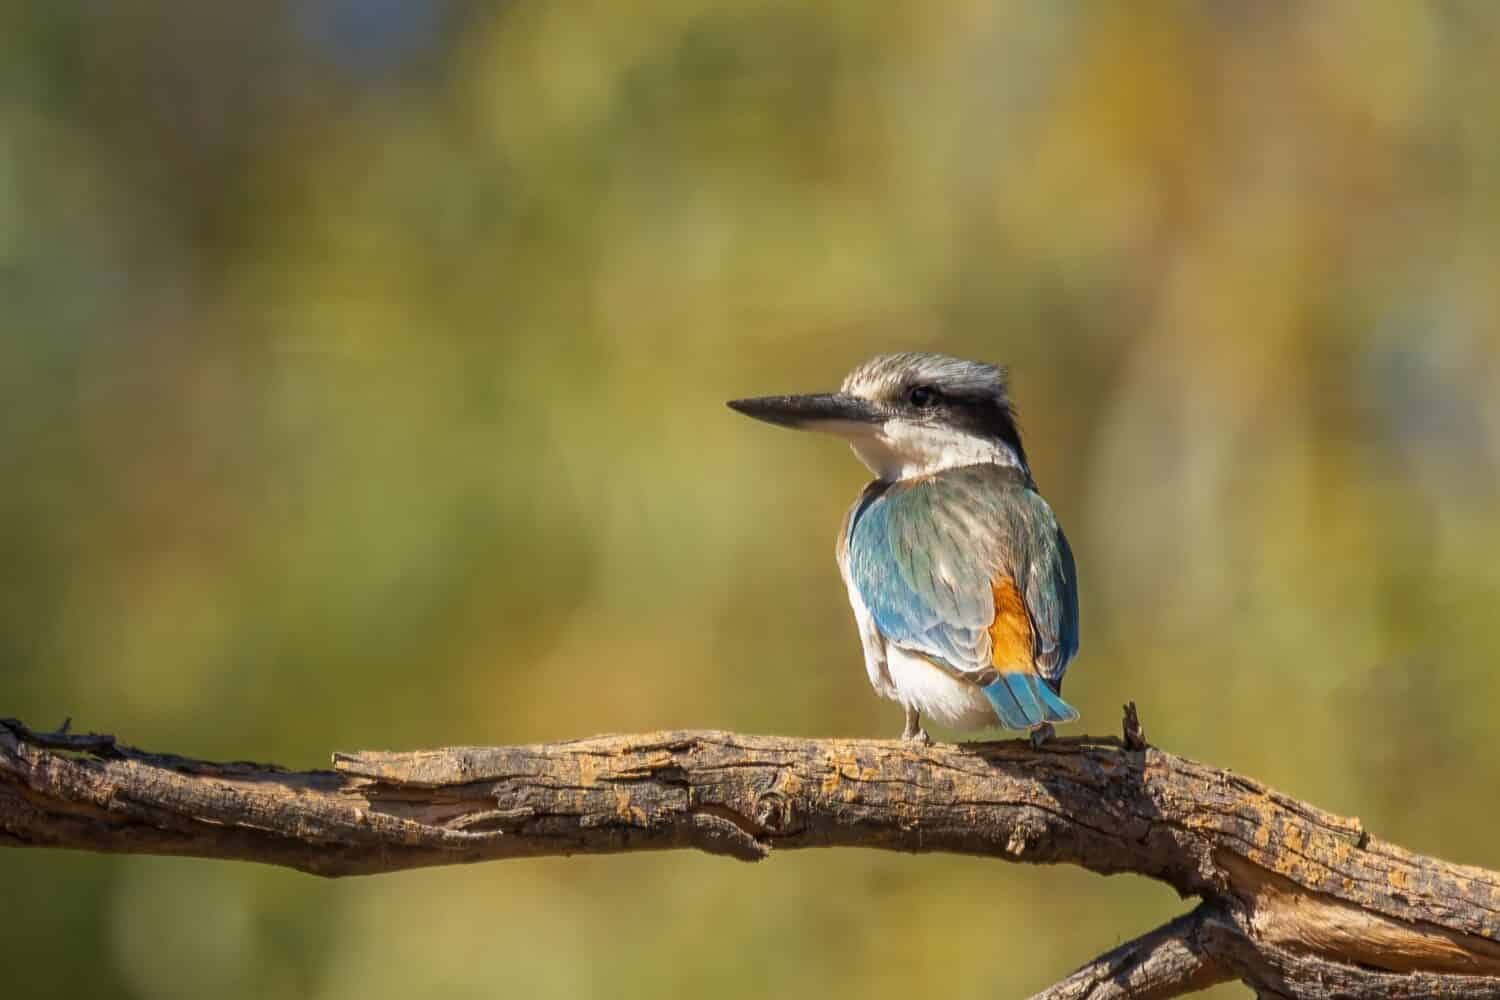 The Red-backed Kingfisher (Todiramphus pyrrhopygius) is a desert dwelling Australian kingfisher with an obvious rusty rump.